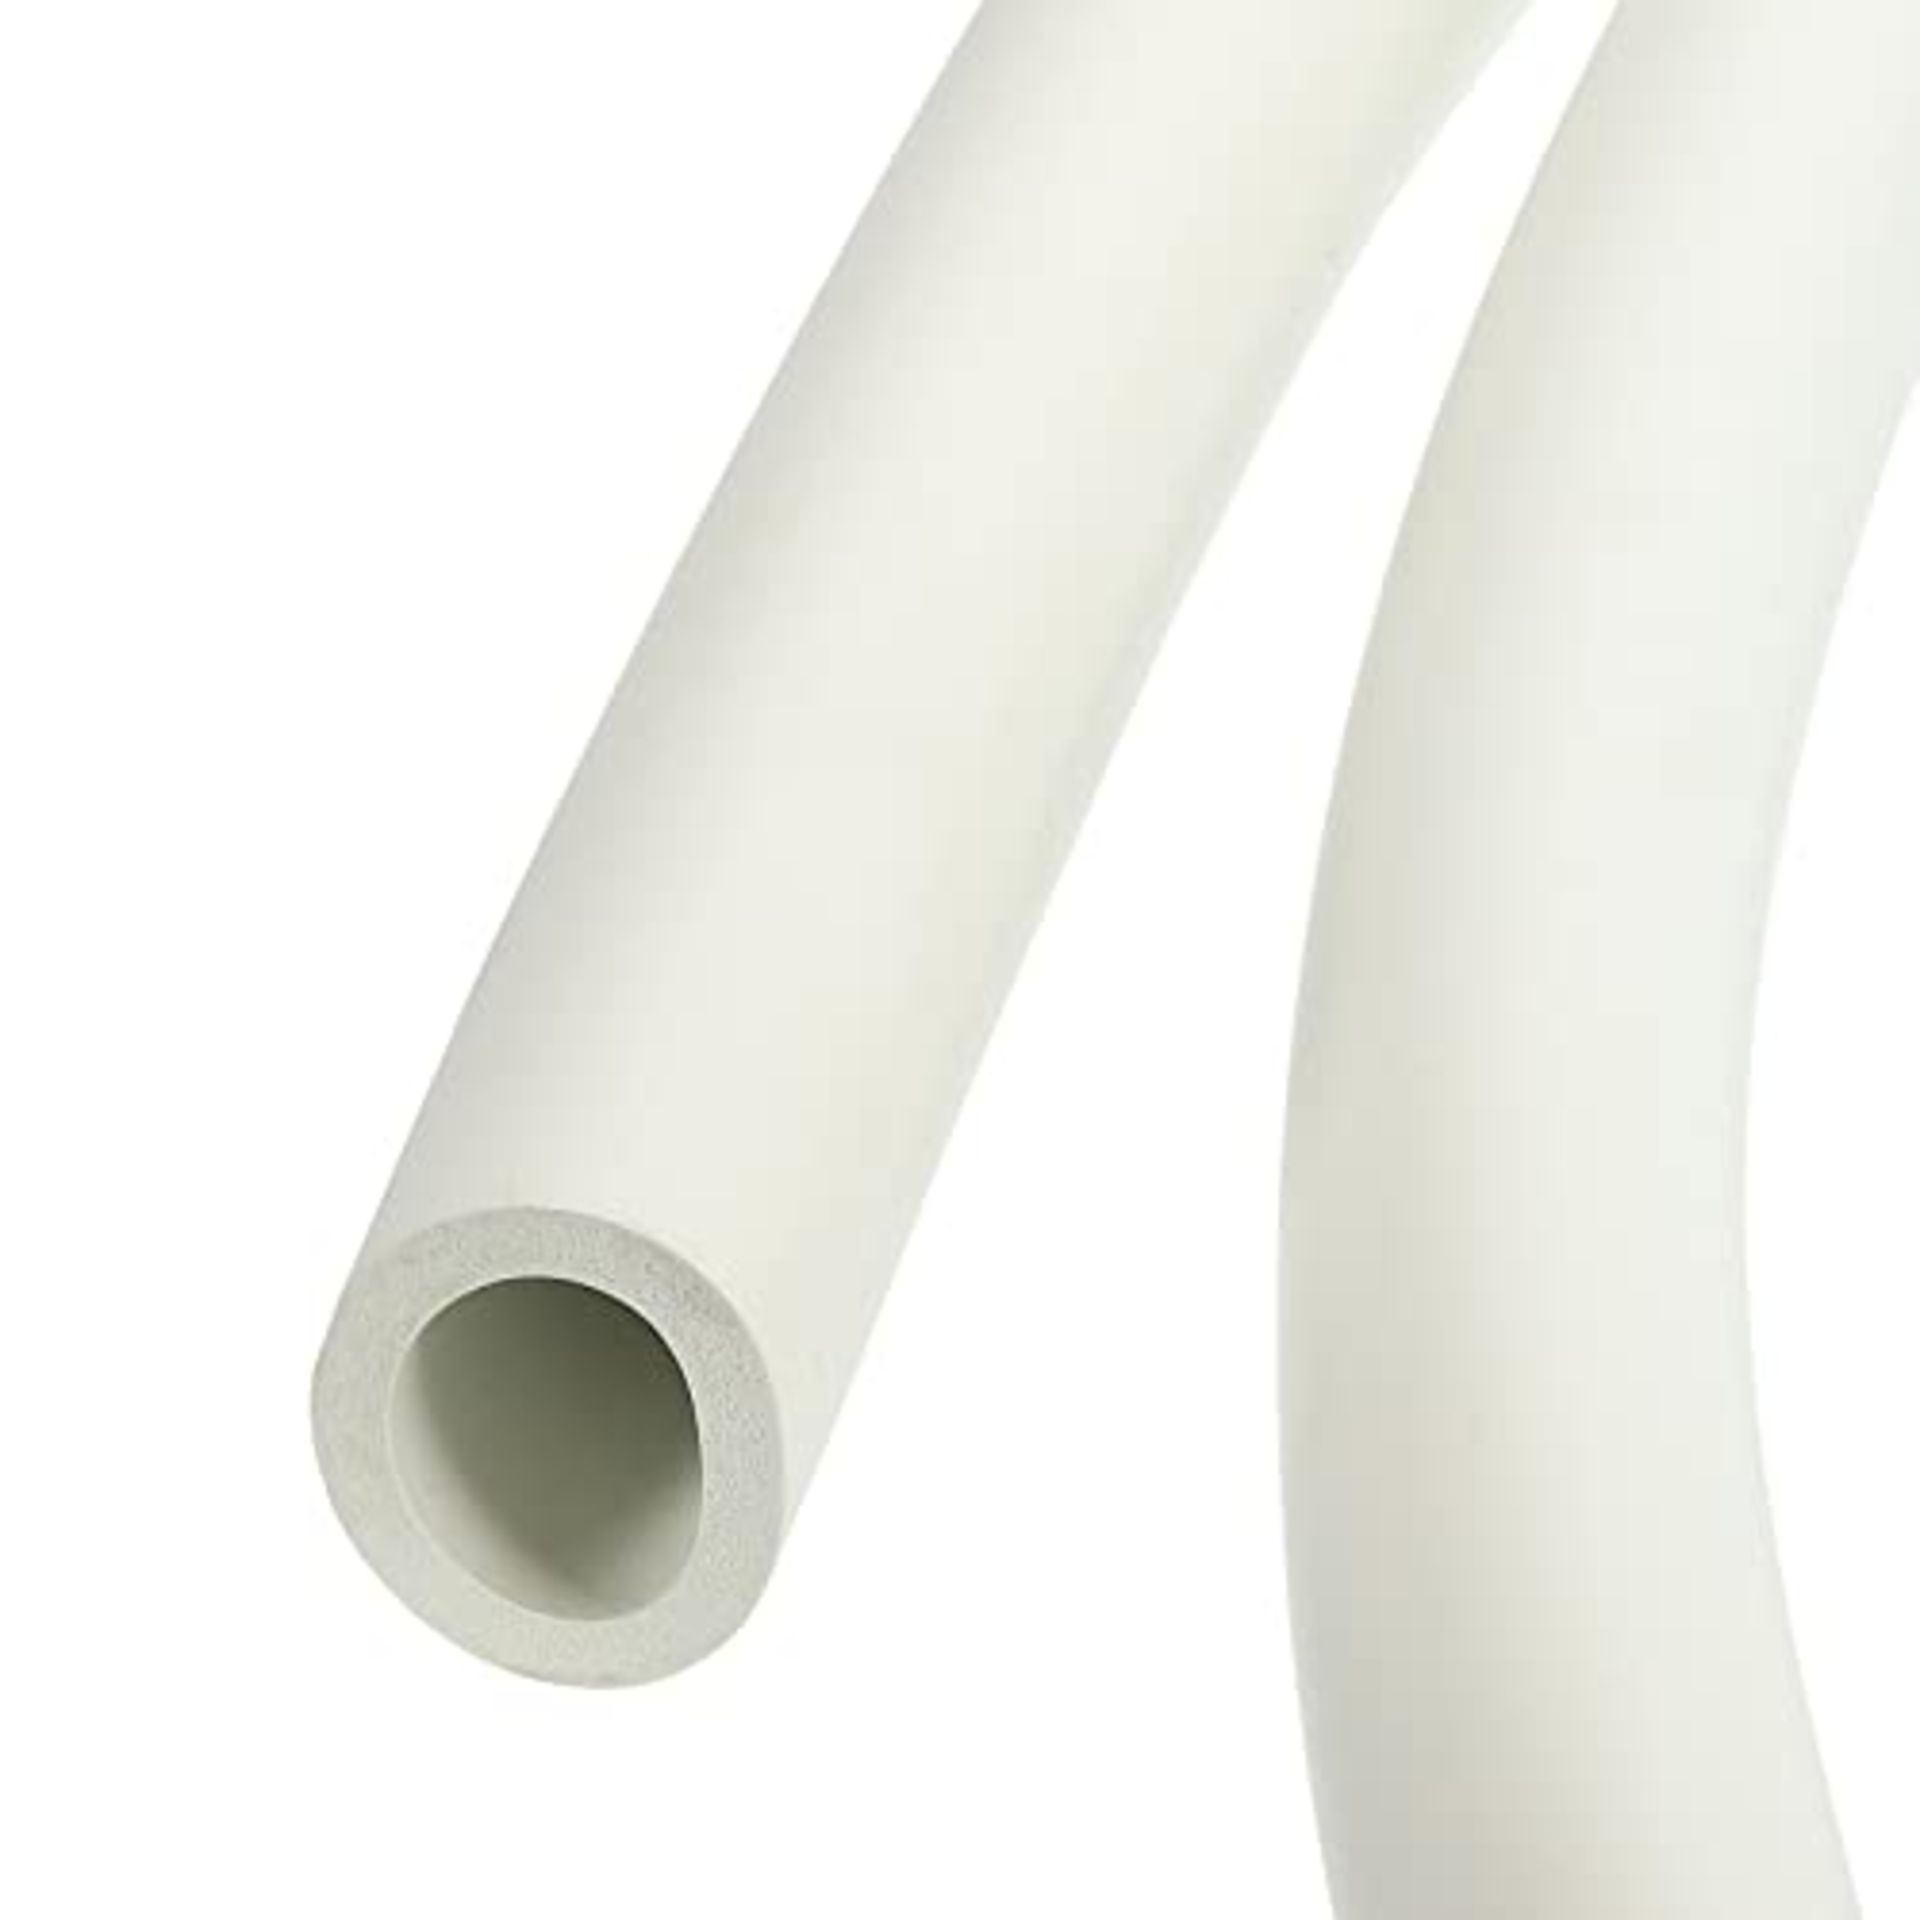 sourcing map Foam Grip Tubing Handle Grips 22mm(7/8") ID 32mm OD 5ft White for Utensils, Fitness, T